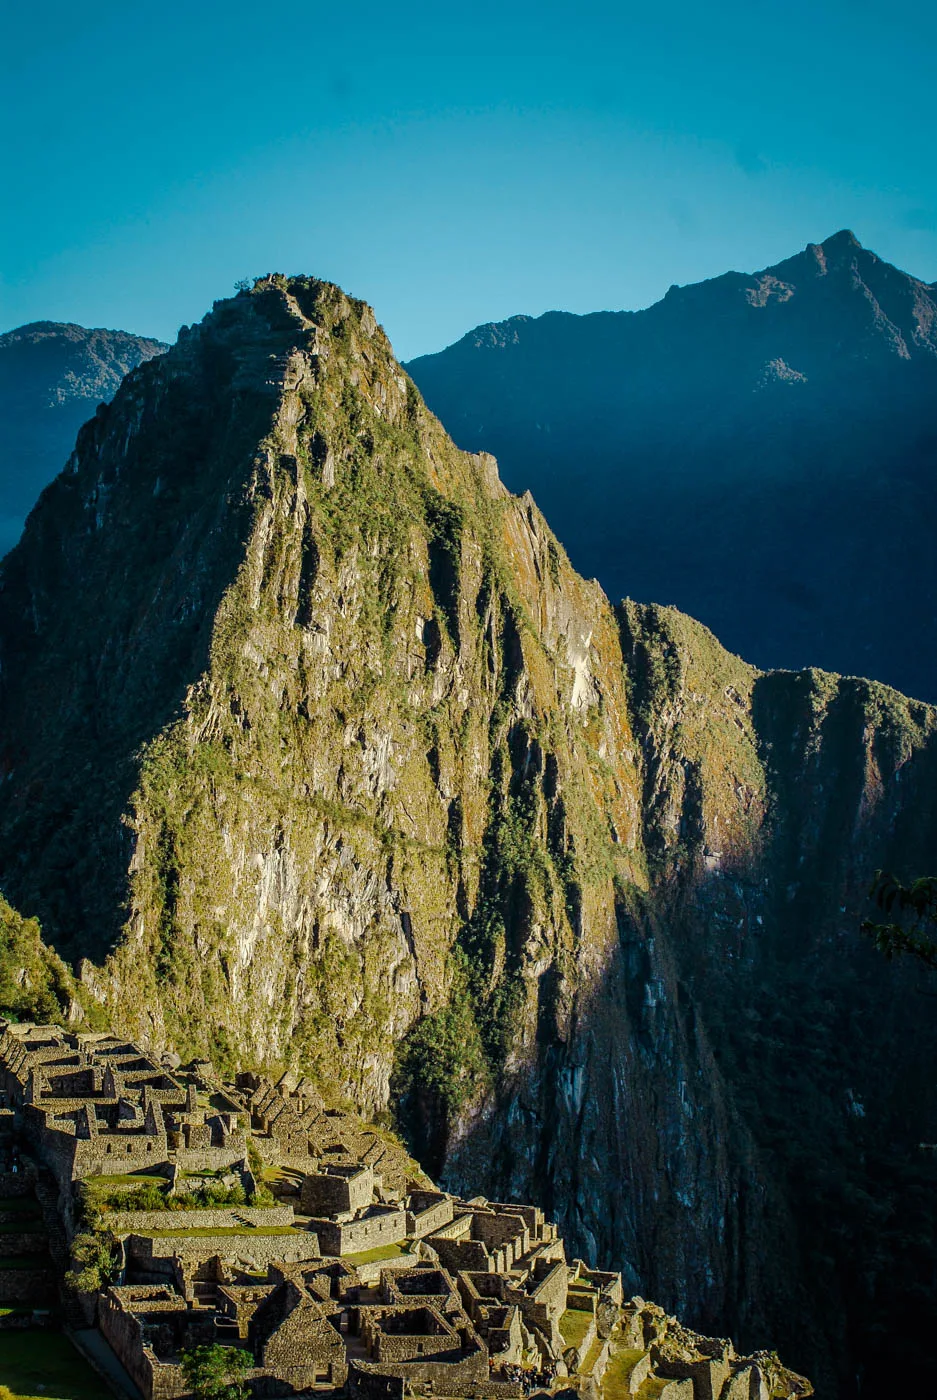 Machu Picchu. South America Travel Bucket List. 90 Awesome Things to do in South America When Backpacking and Travelling #southamerica #bucketlist #traveldestinations